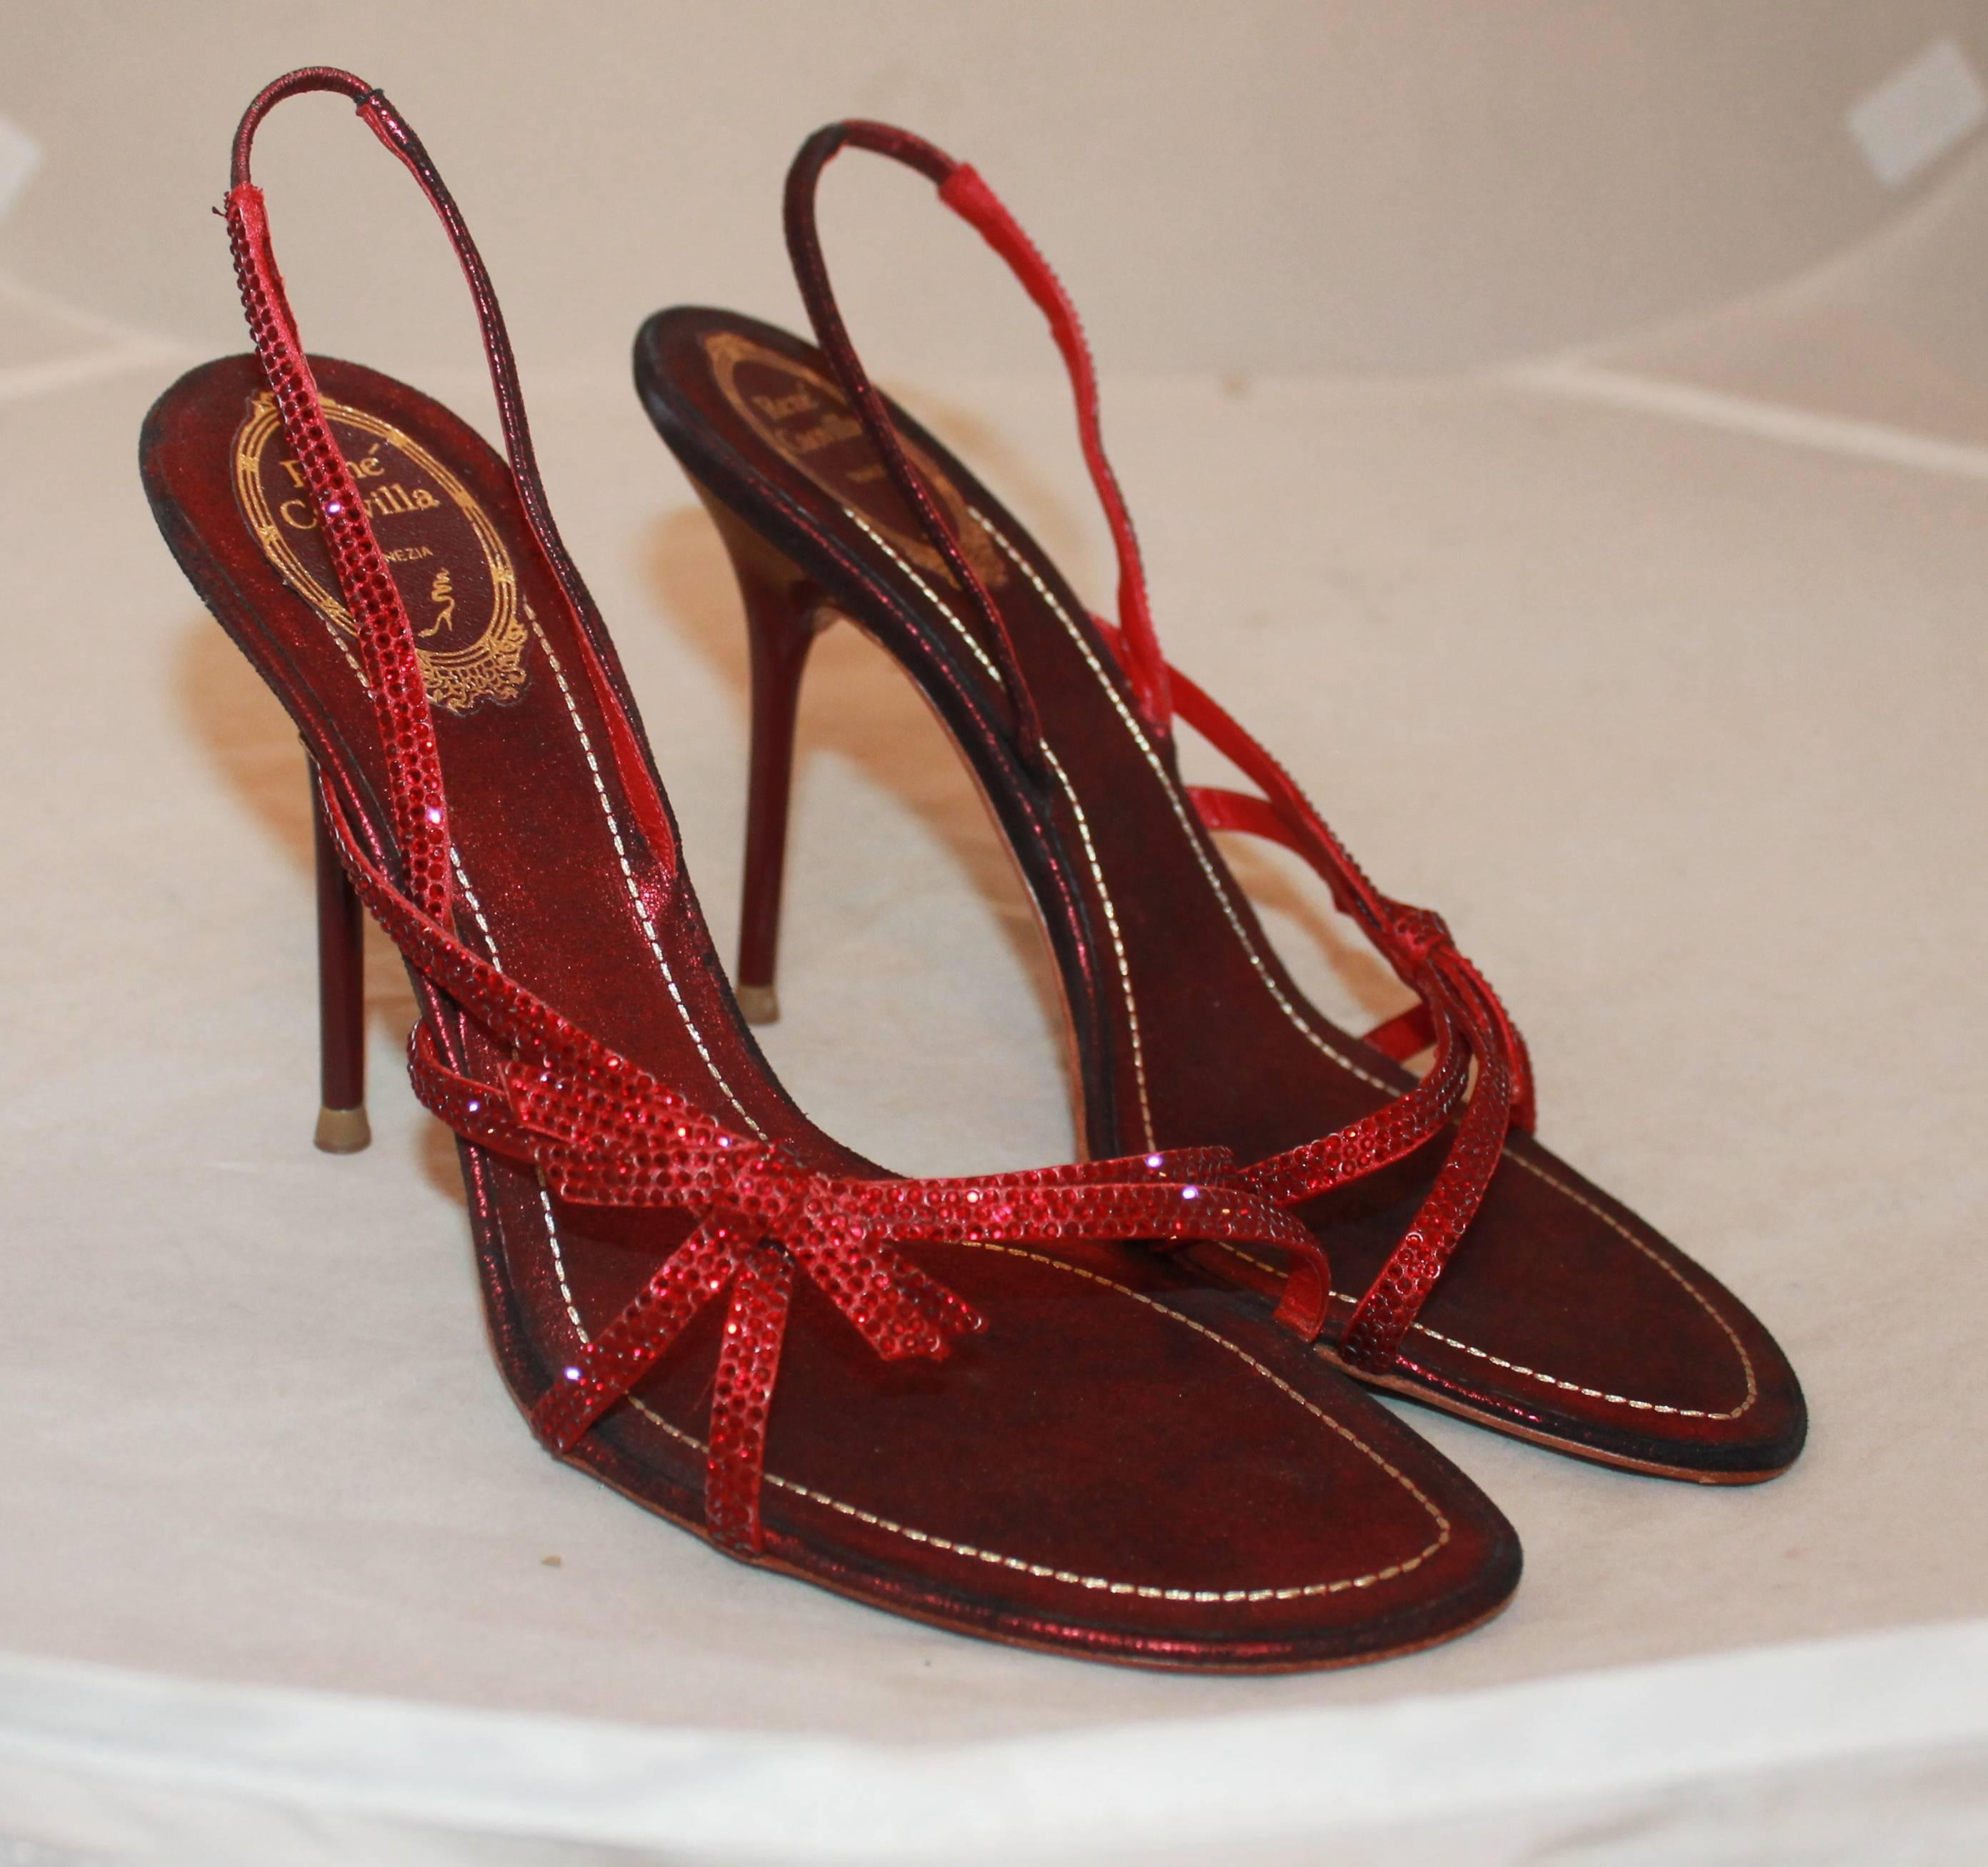 Rene Caovilla Red Strappy Sandals with Rhinestones - 39.5. They are new and have never been worn. These evening heels  are truly gorgeous and have a 